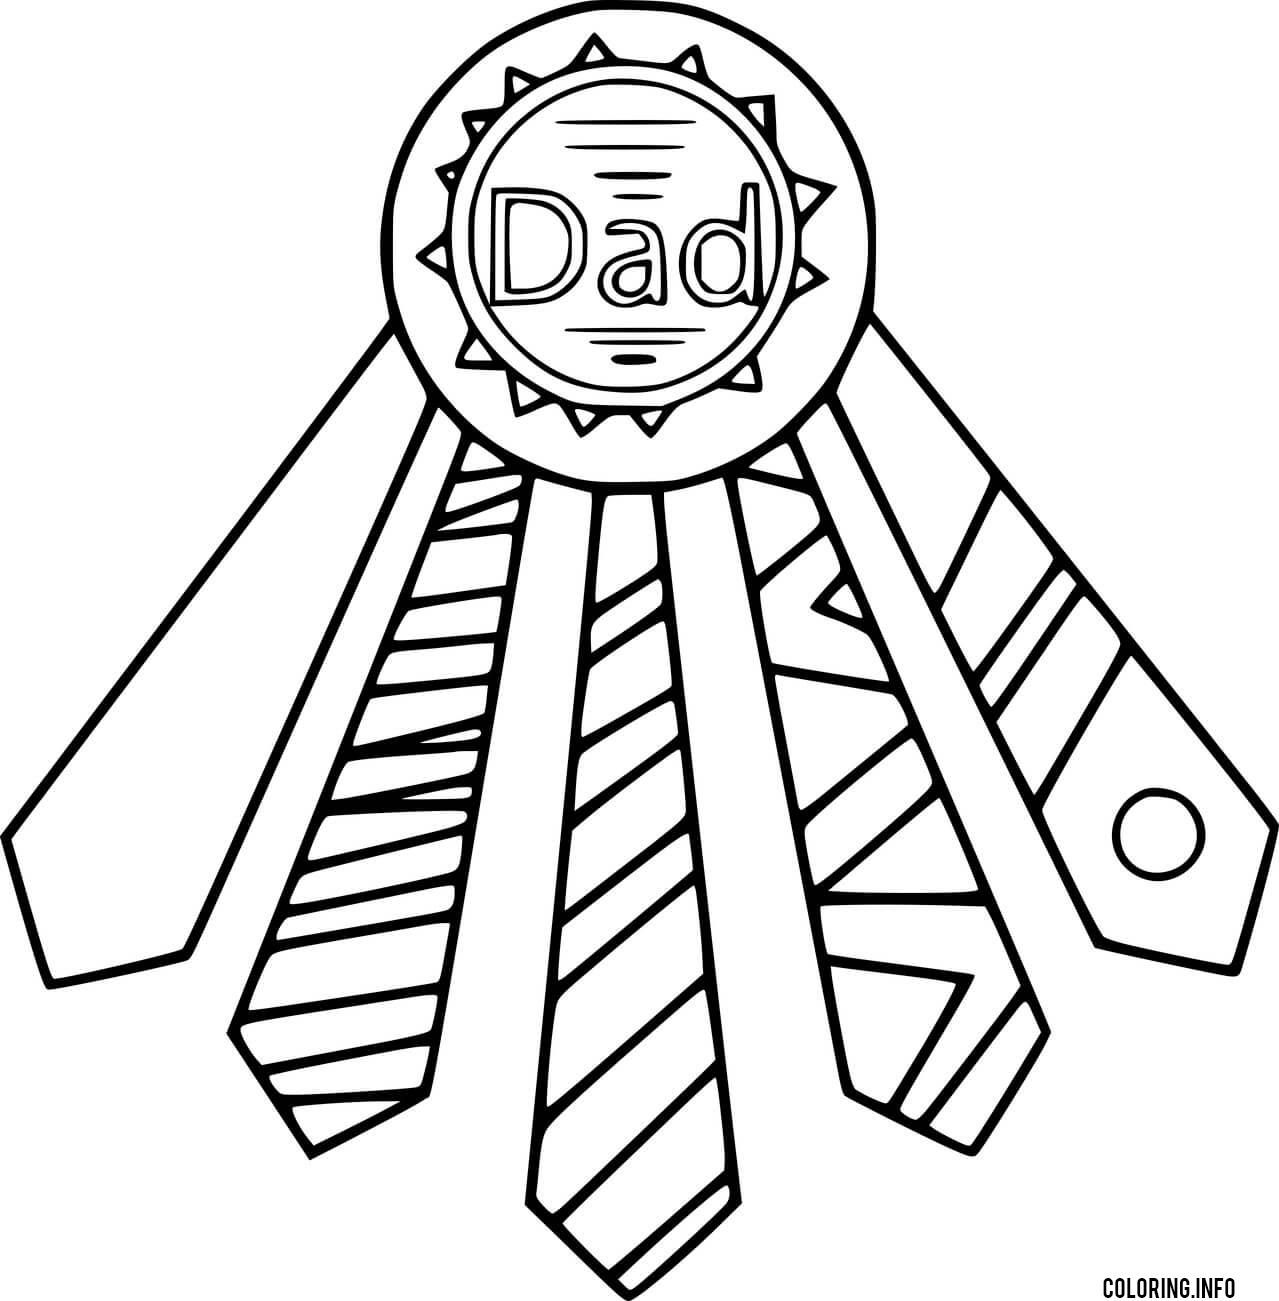 Dad Badge And Five Tie coloring